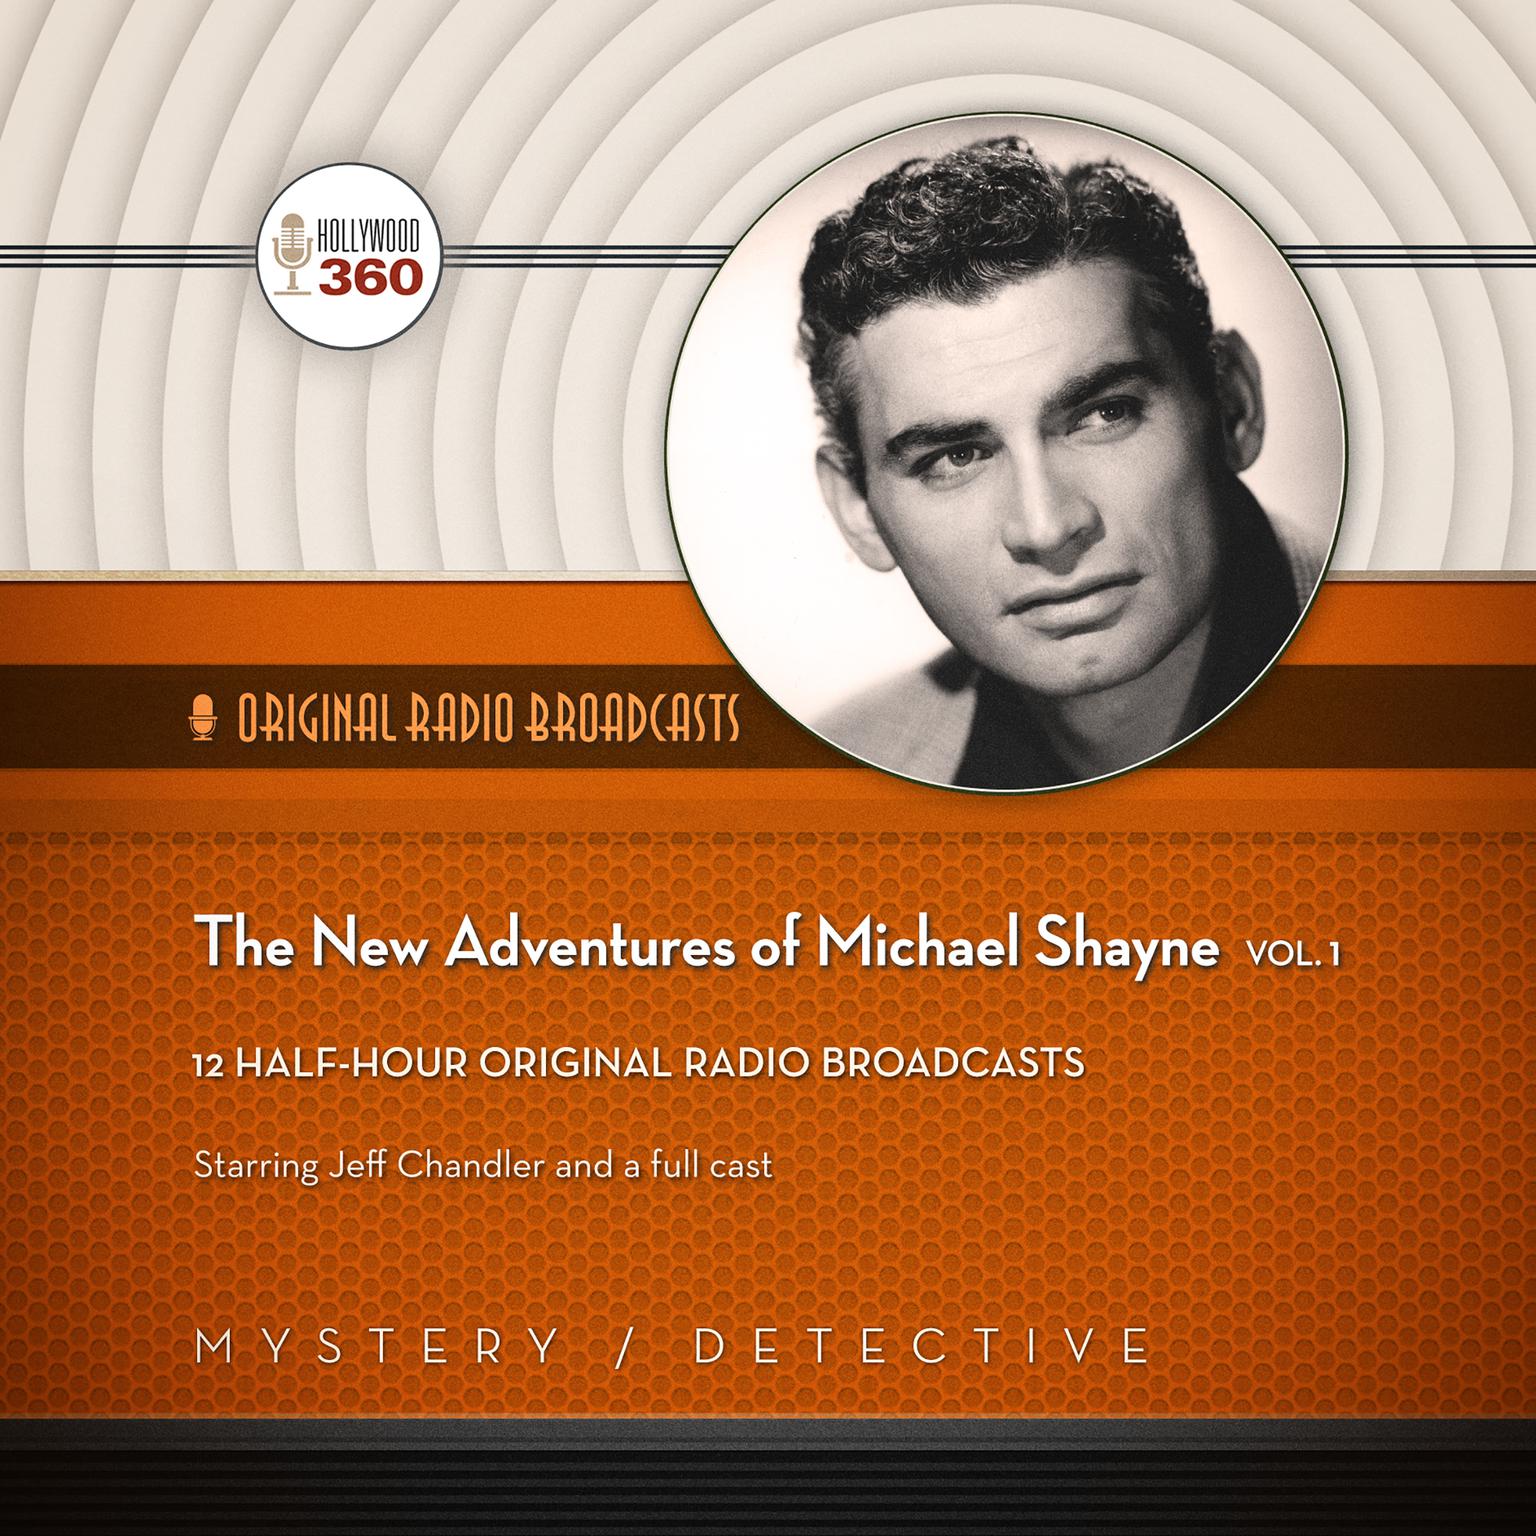 The New Adventures of Michael Shayne, Vol. 1 Audiobook, by Hollywood 360